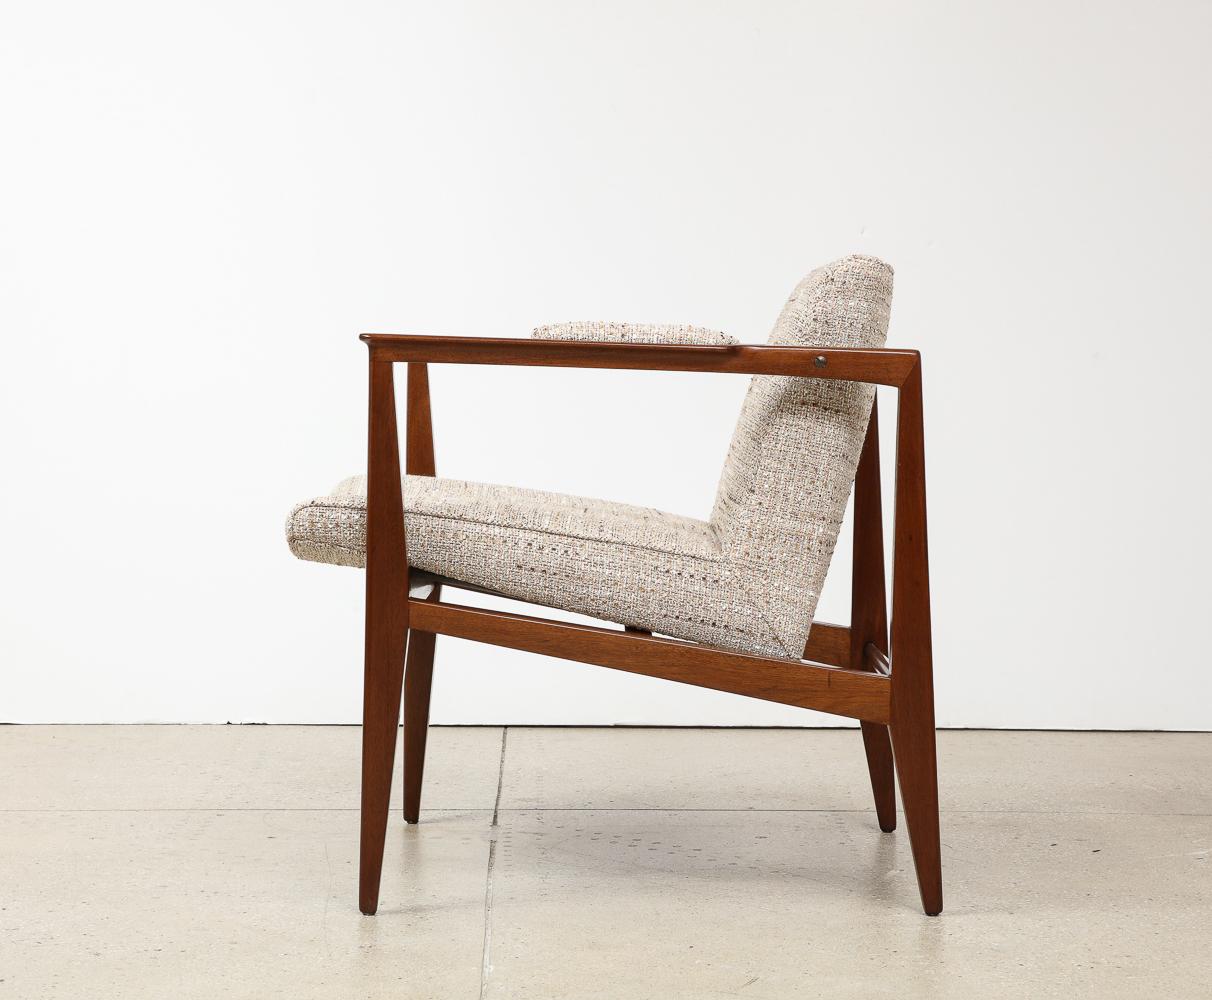 Hand-Crafted Edward Wormley Chair For Sale